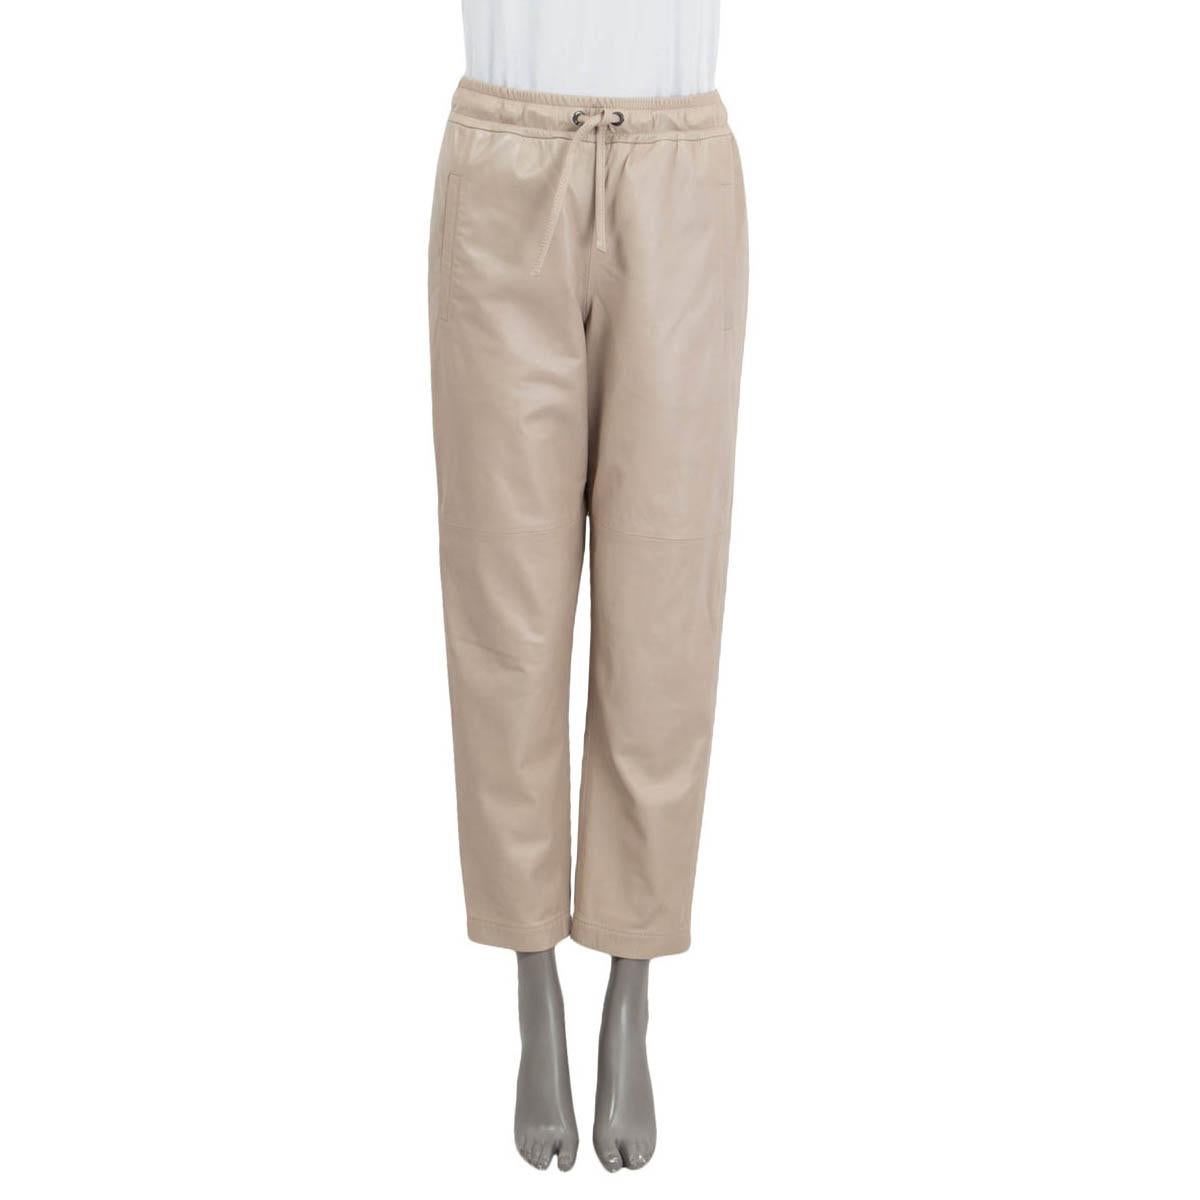 BRUNELLO CUCINELLI light taupe leather PULL ON JOGGING Pants 40 S